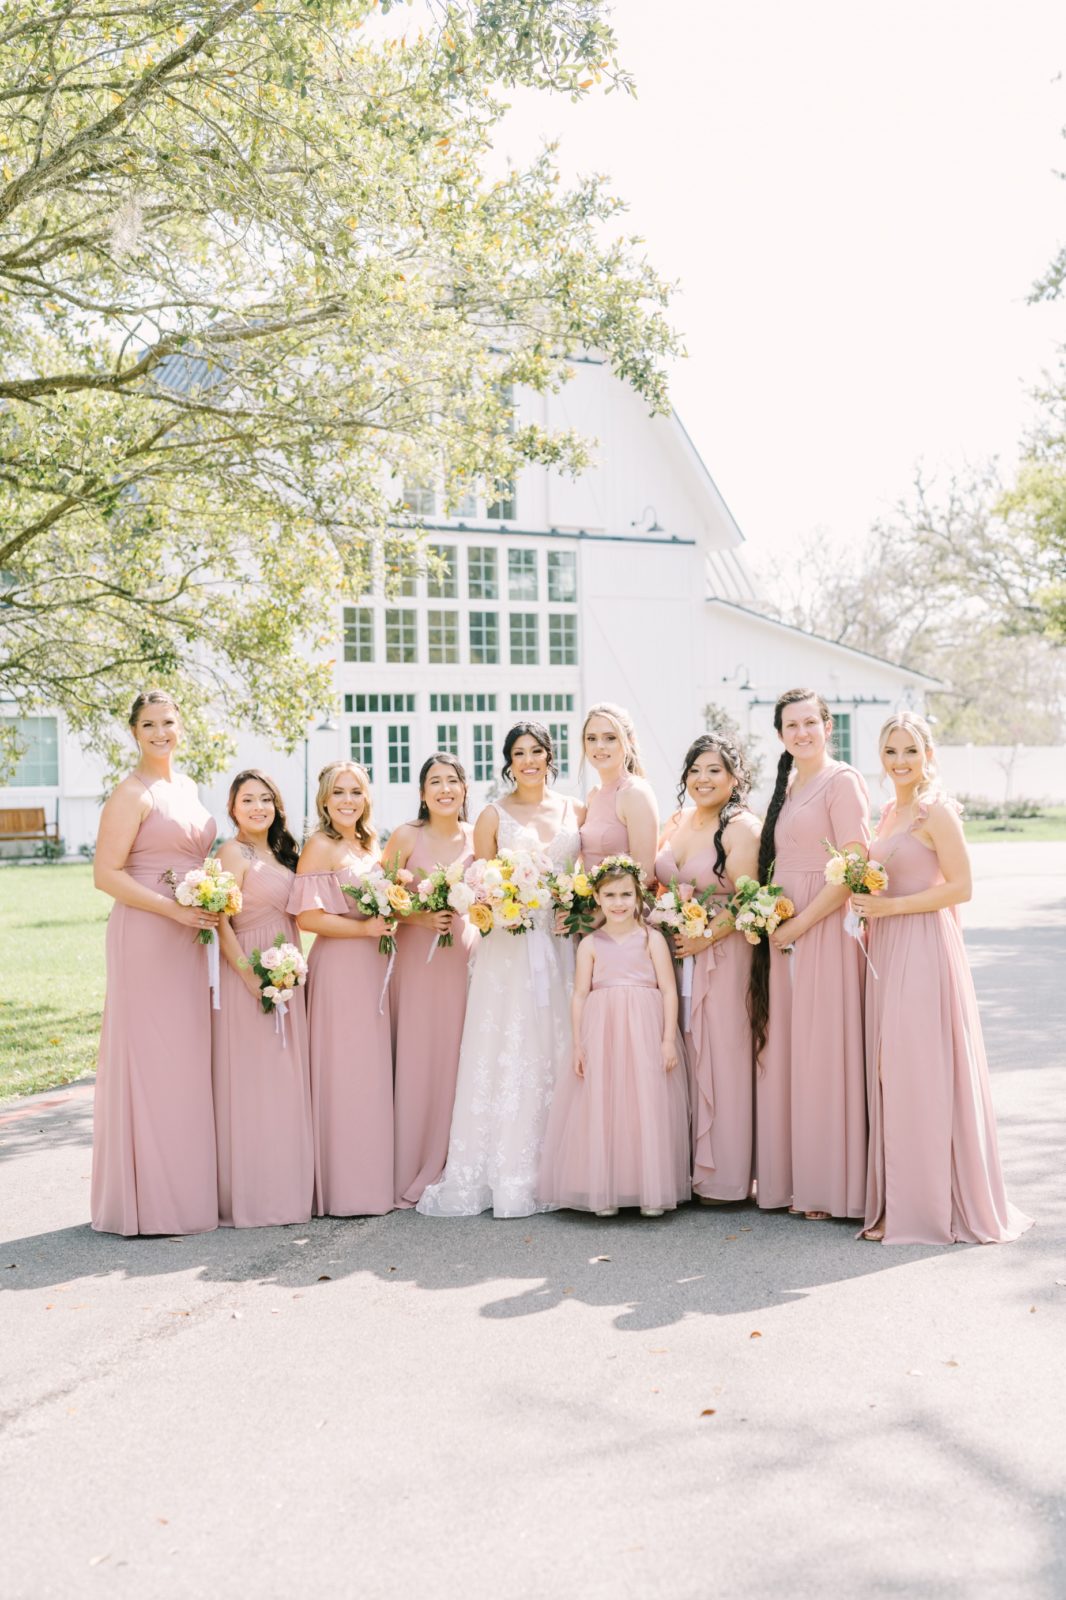 Outside a farmhouse, a bride smiles with her bridesmaids in East Houston by Christina Elliott Photography. pink bridesmaid dress #ChristinaElliottPhotography #ChristinaElliottWeddings #Houstonwedding #TheSpringsVenue #EastHoustonweddings #Mrs #Mr